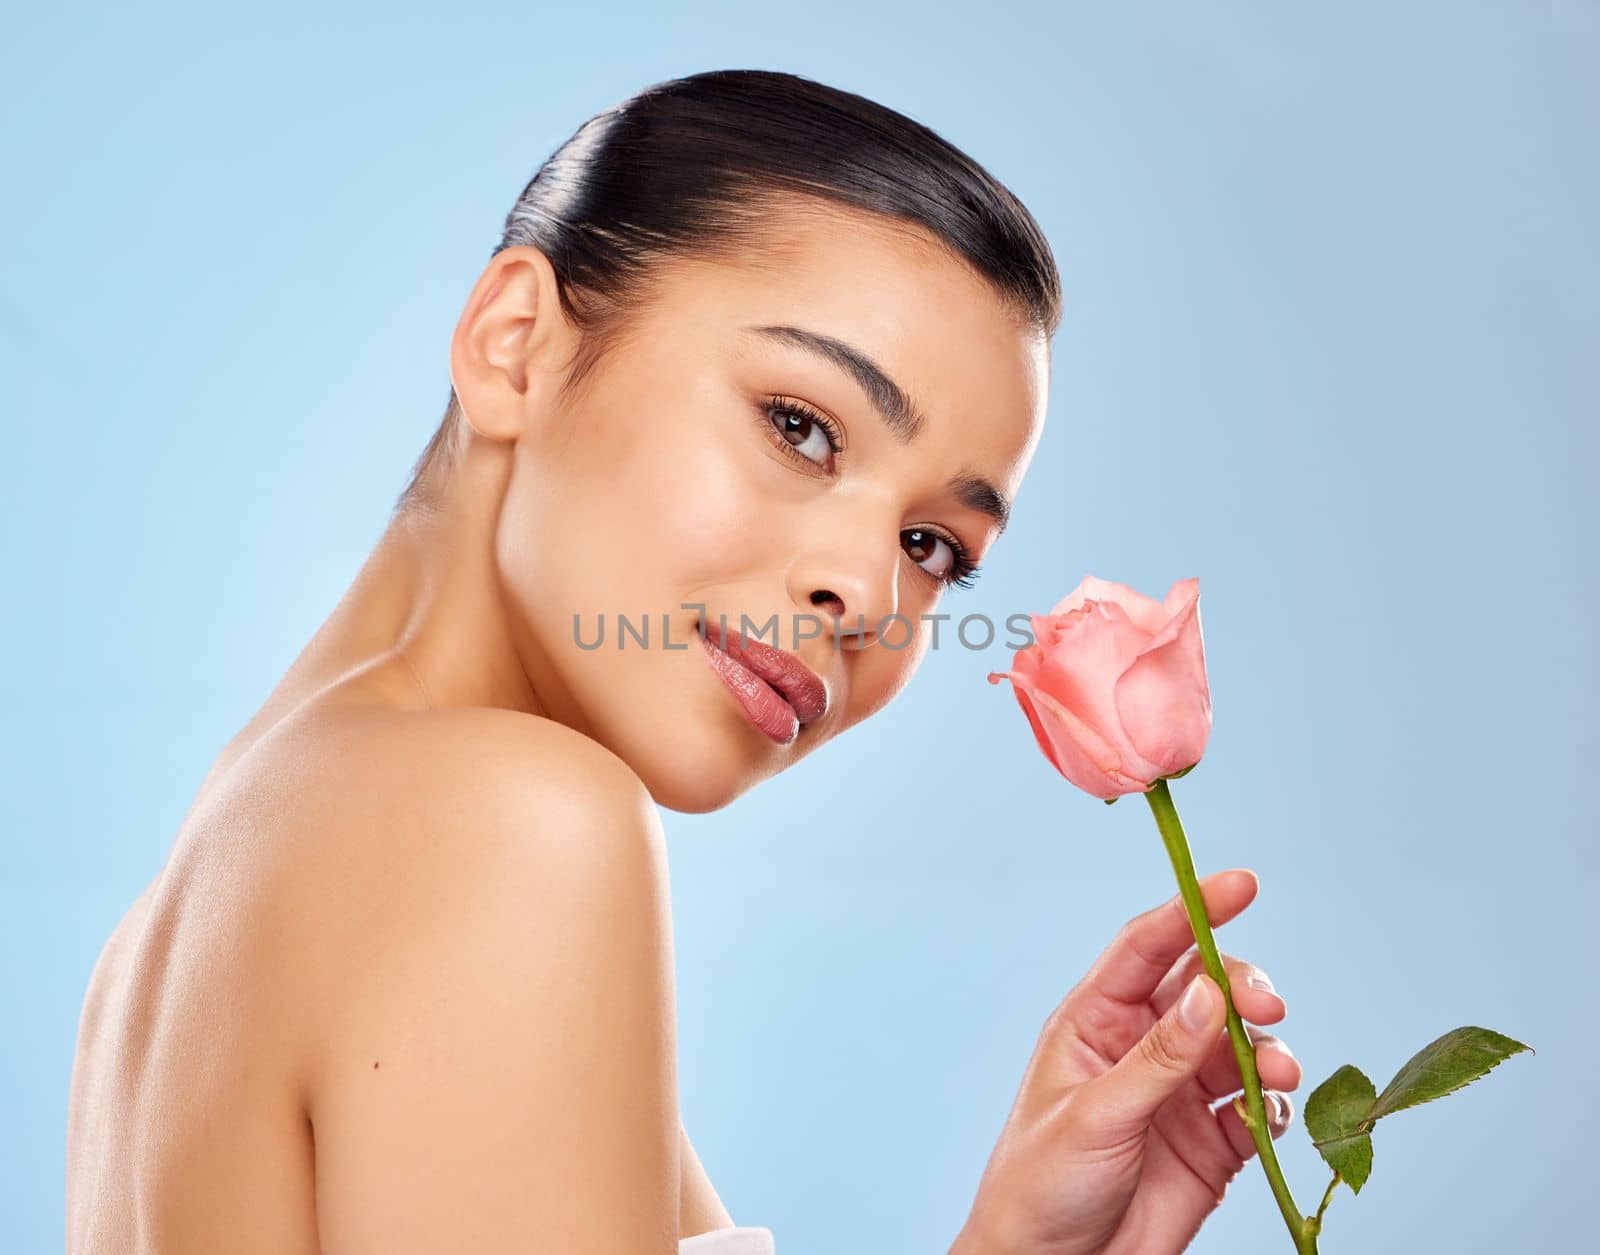 Her natural beauty blooms like no other. Studio portrait of an attractive young woman posing with a pink rose against a blue background